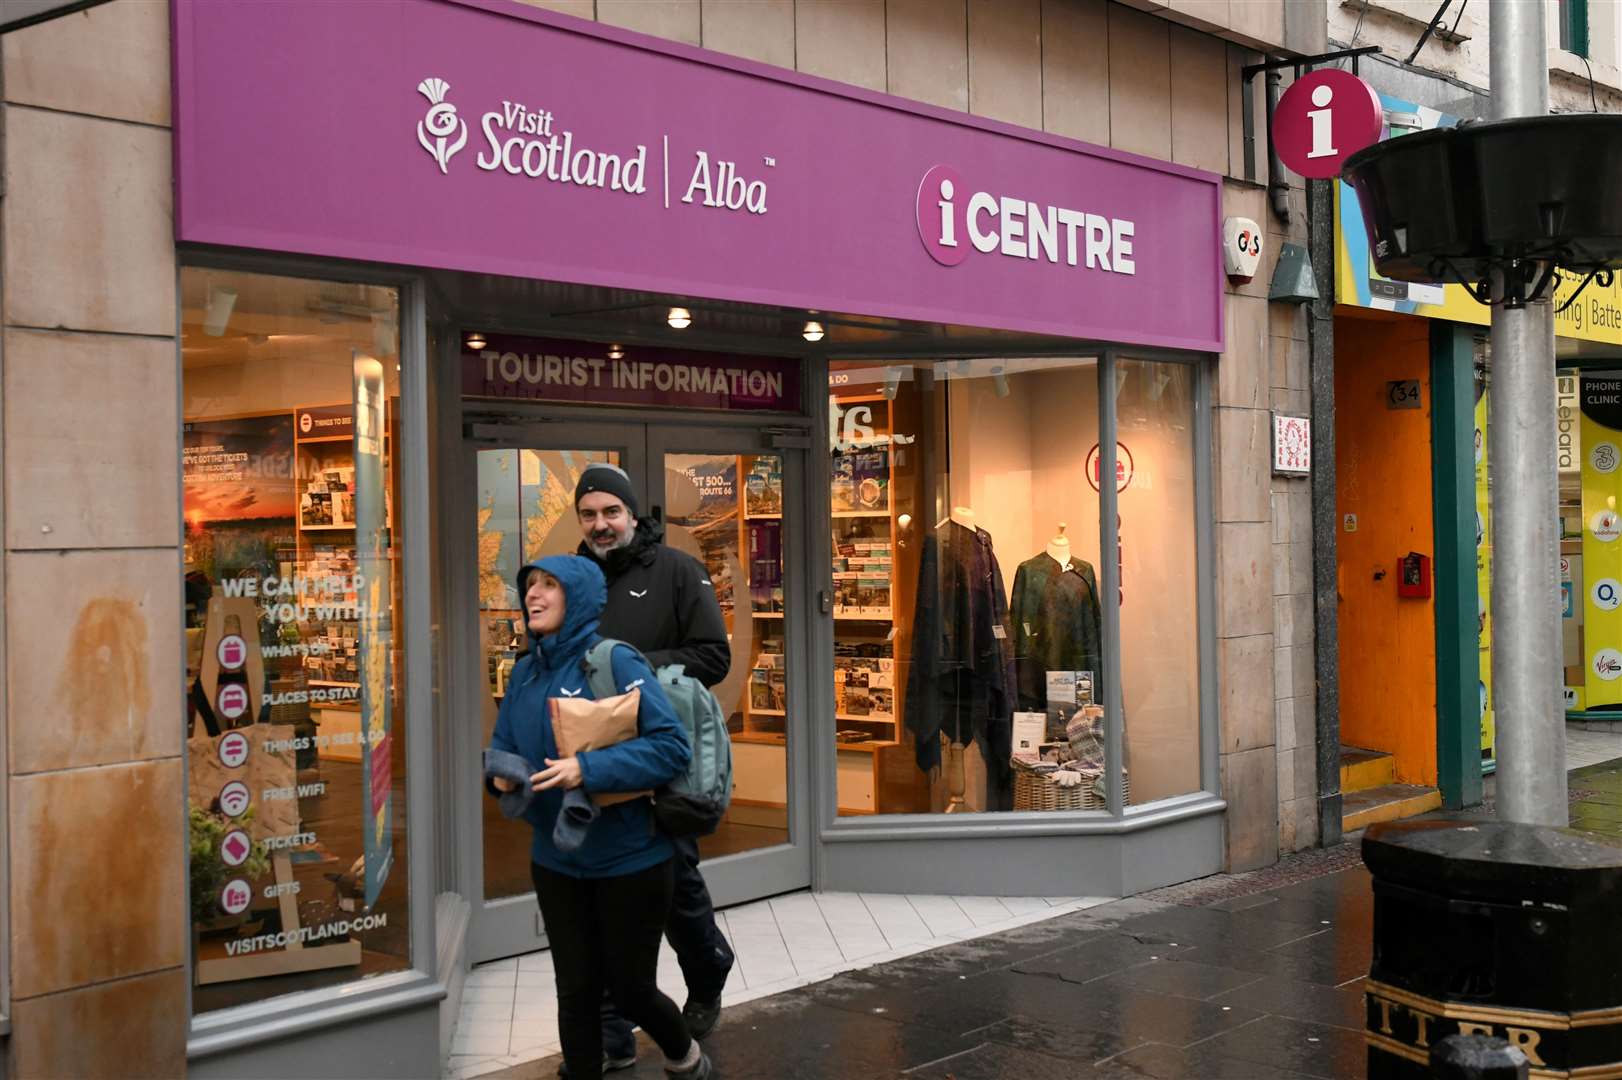 VisitScotland's iCentres, including in Inverness, are to be closed. Picture: James Mackenzie.